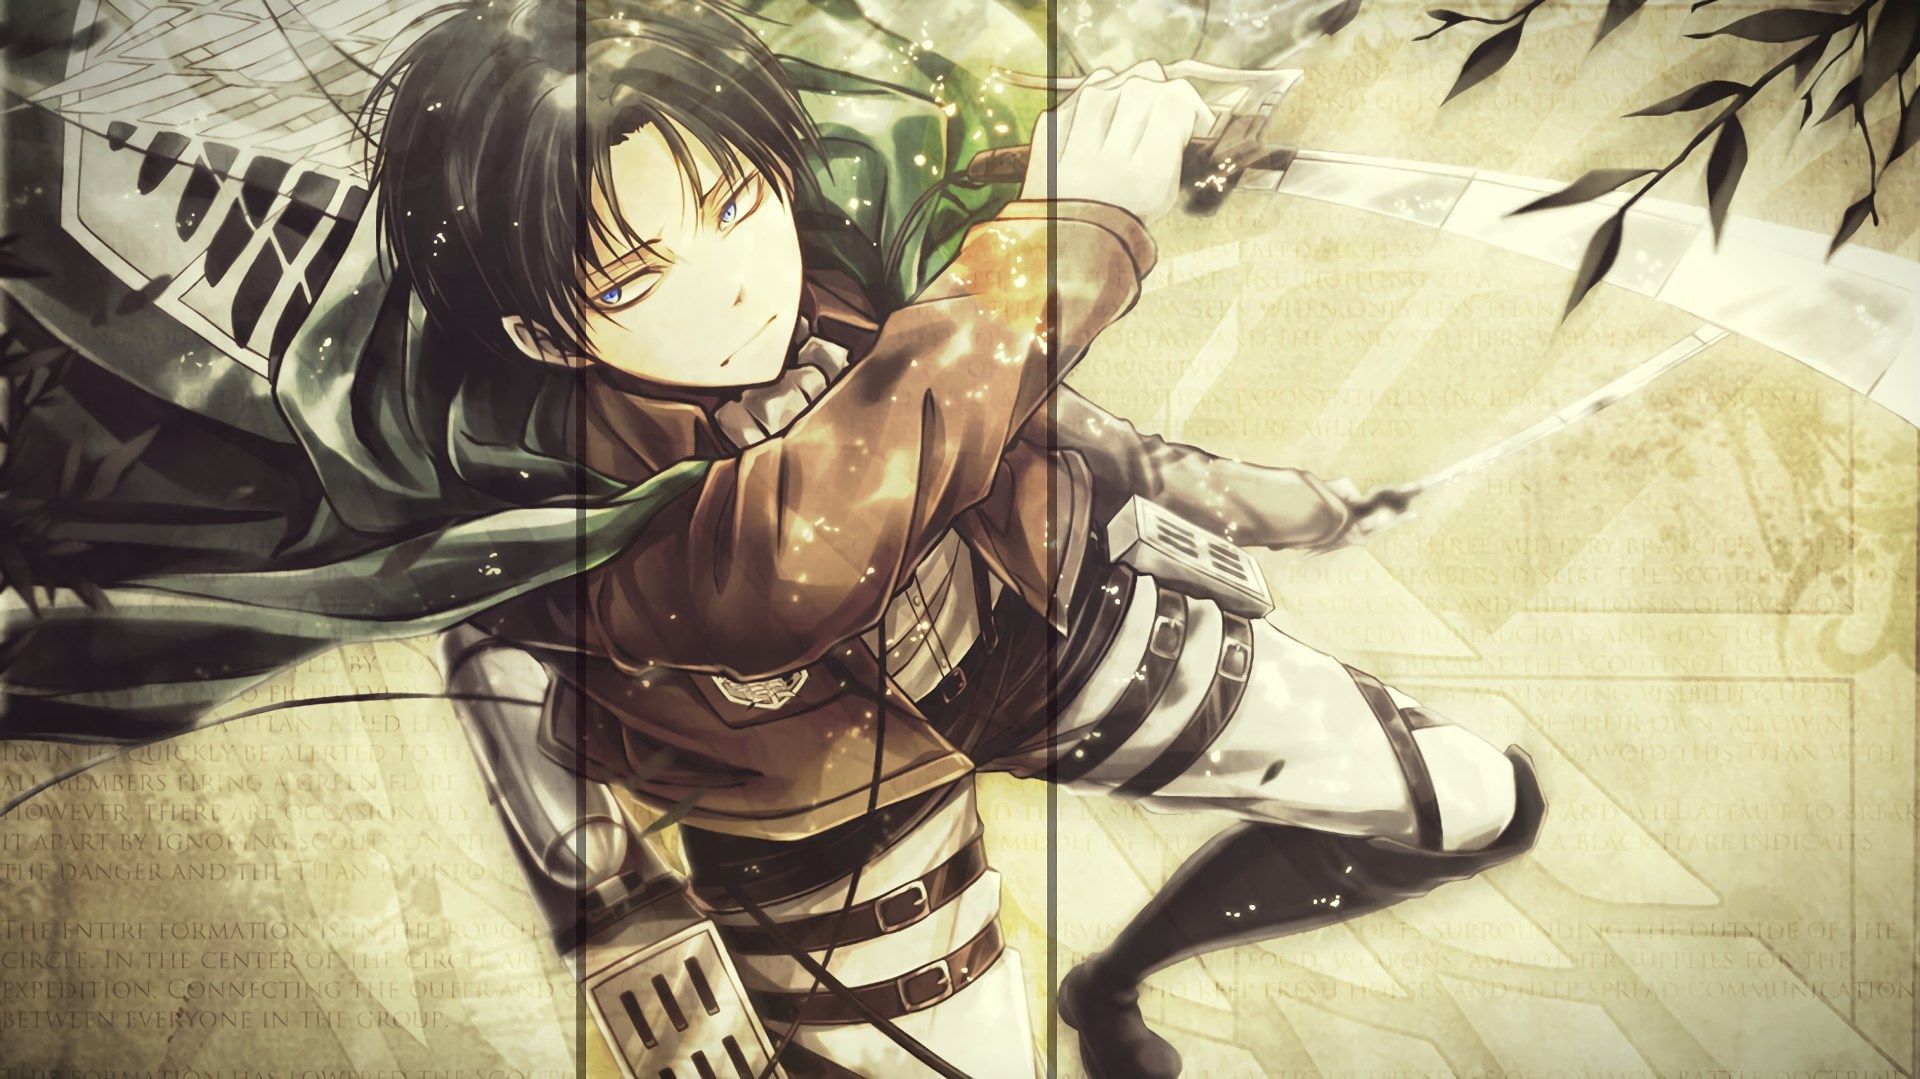 Wallpaper And Screensavers For Attack On Titan